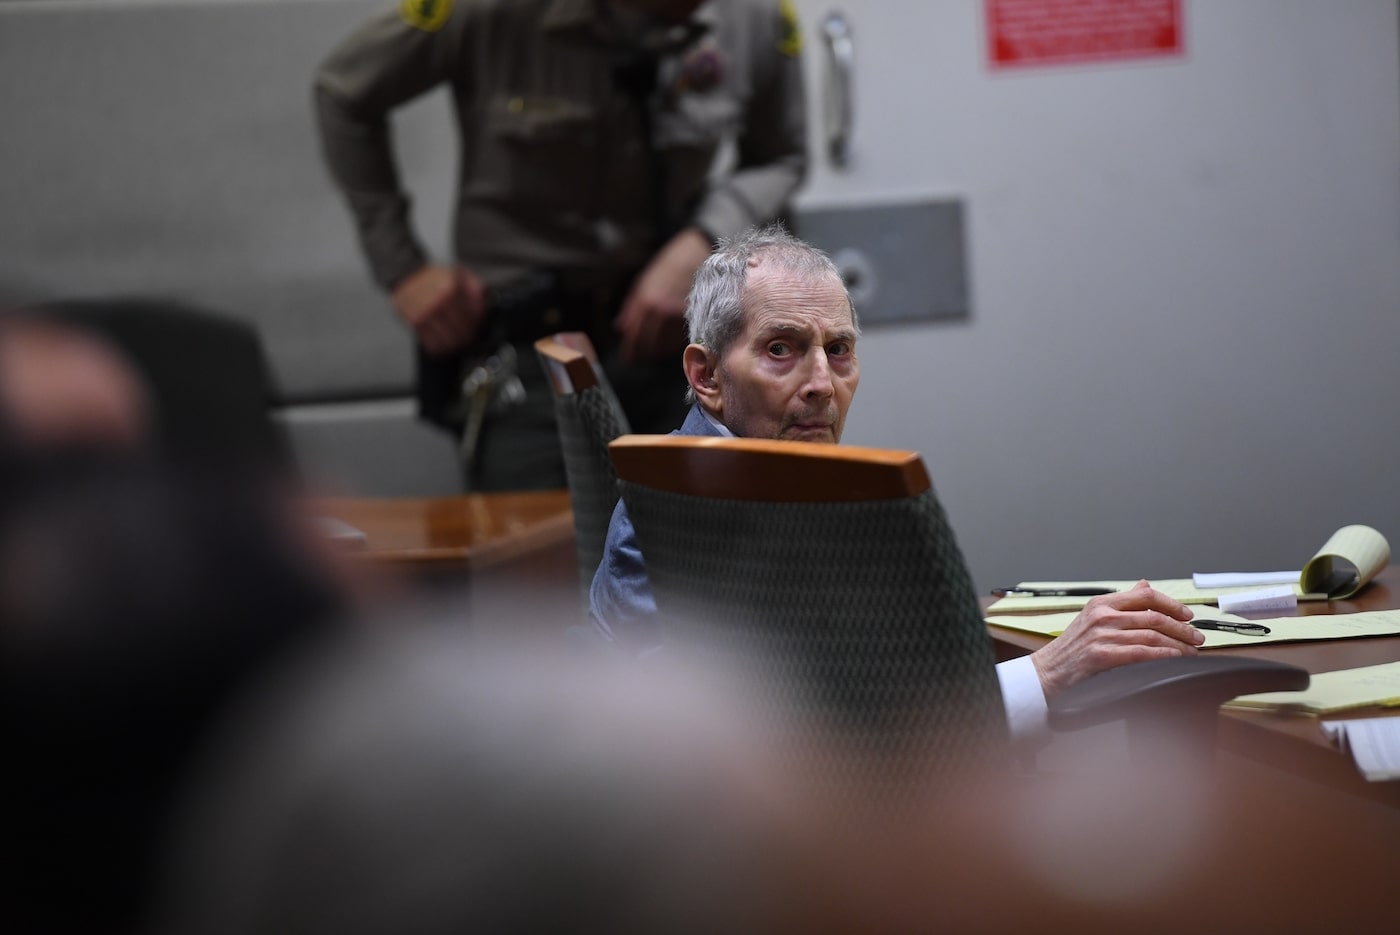 Robert Durst appears in court and looks behind him